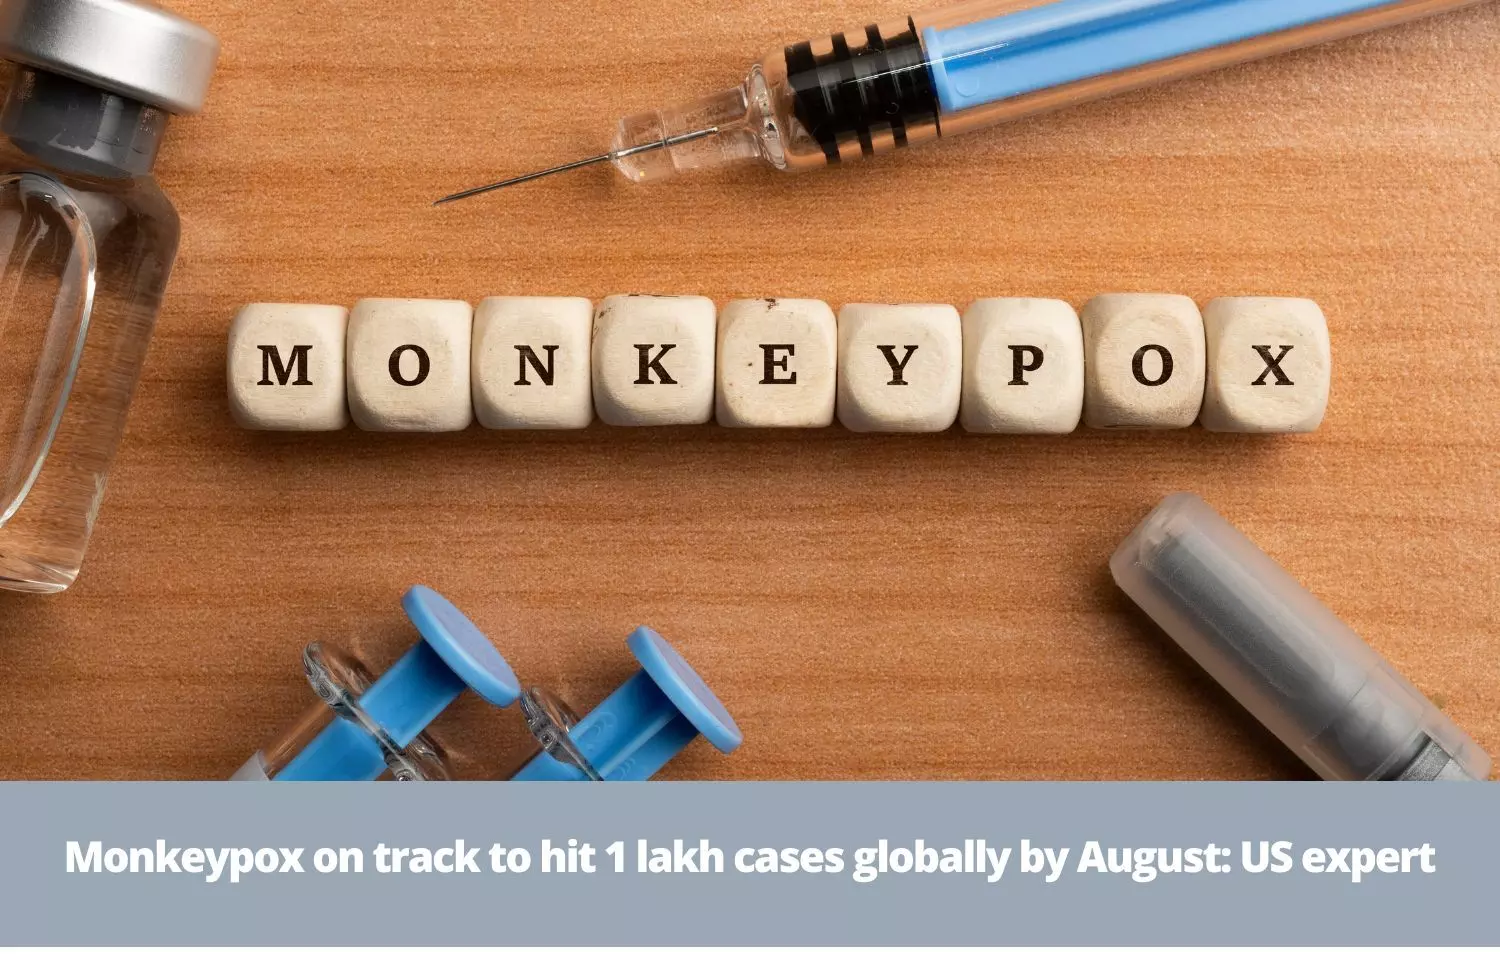 Monkeypox on track to hit 1 lakh cases worldwide by August: US expert